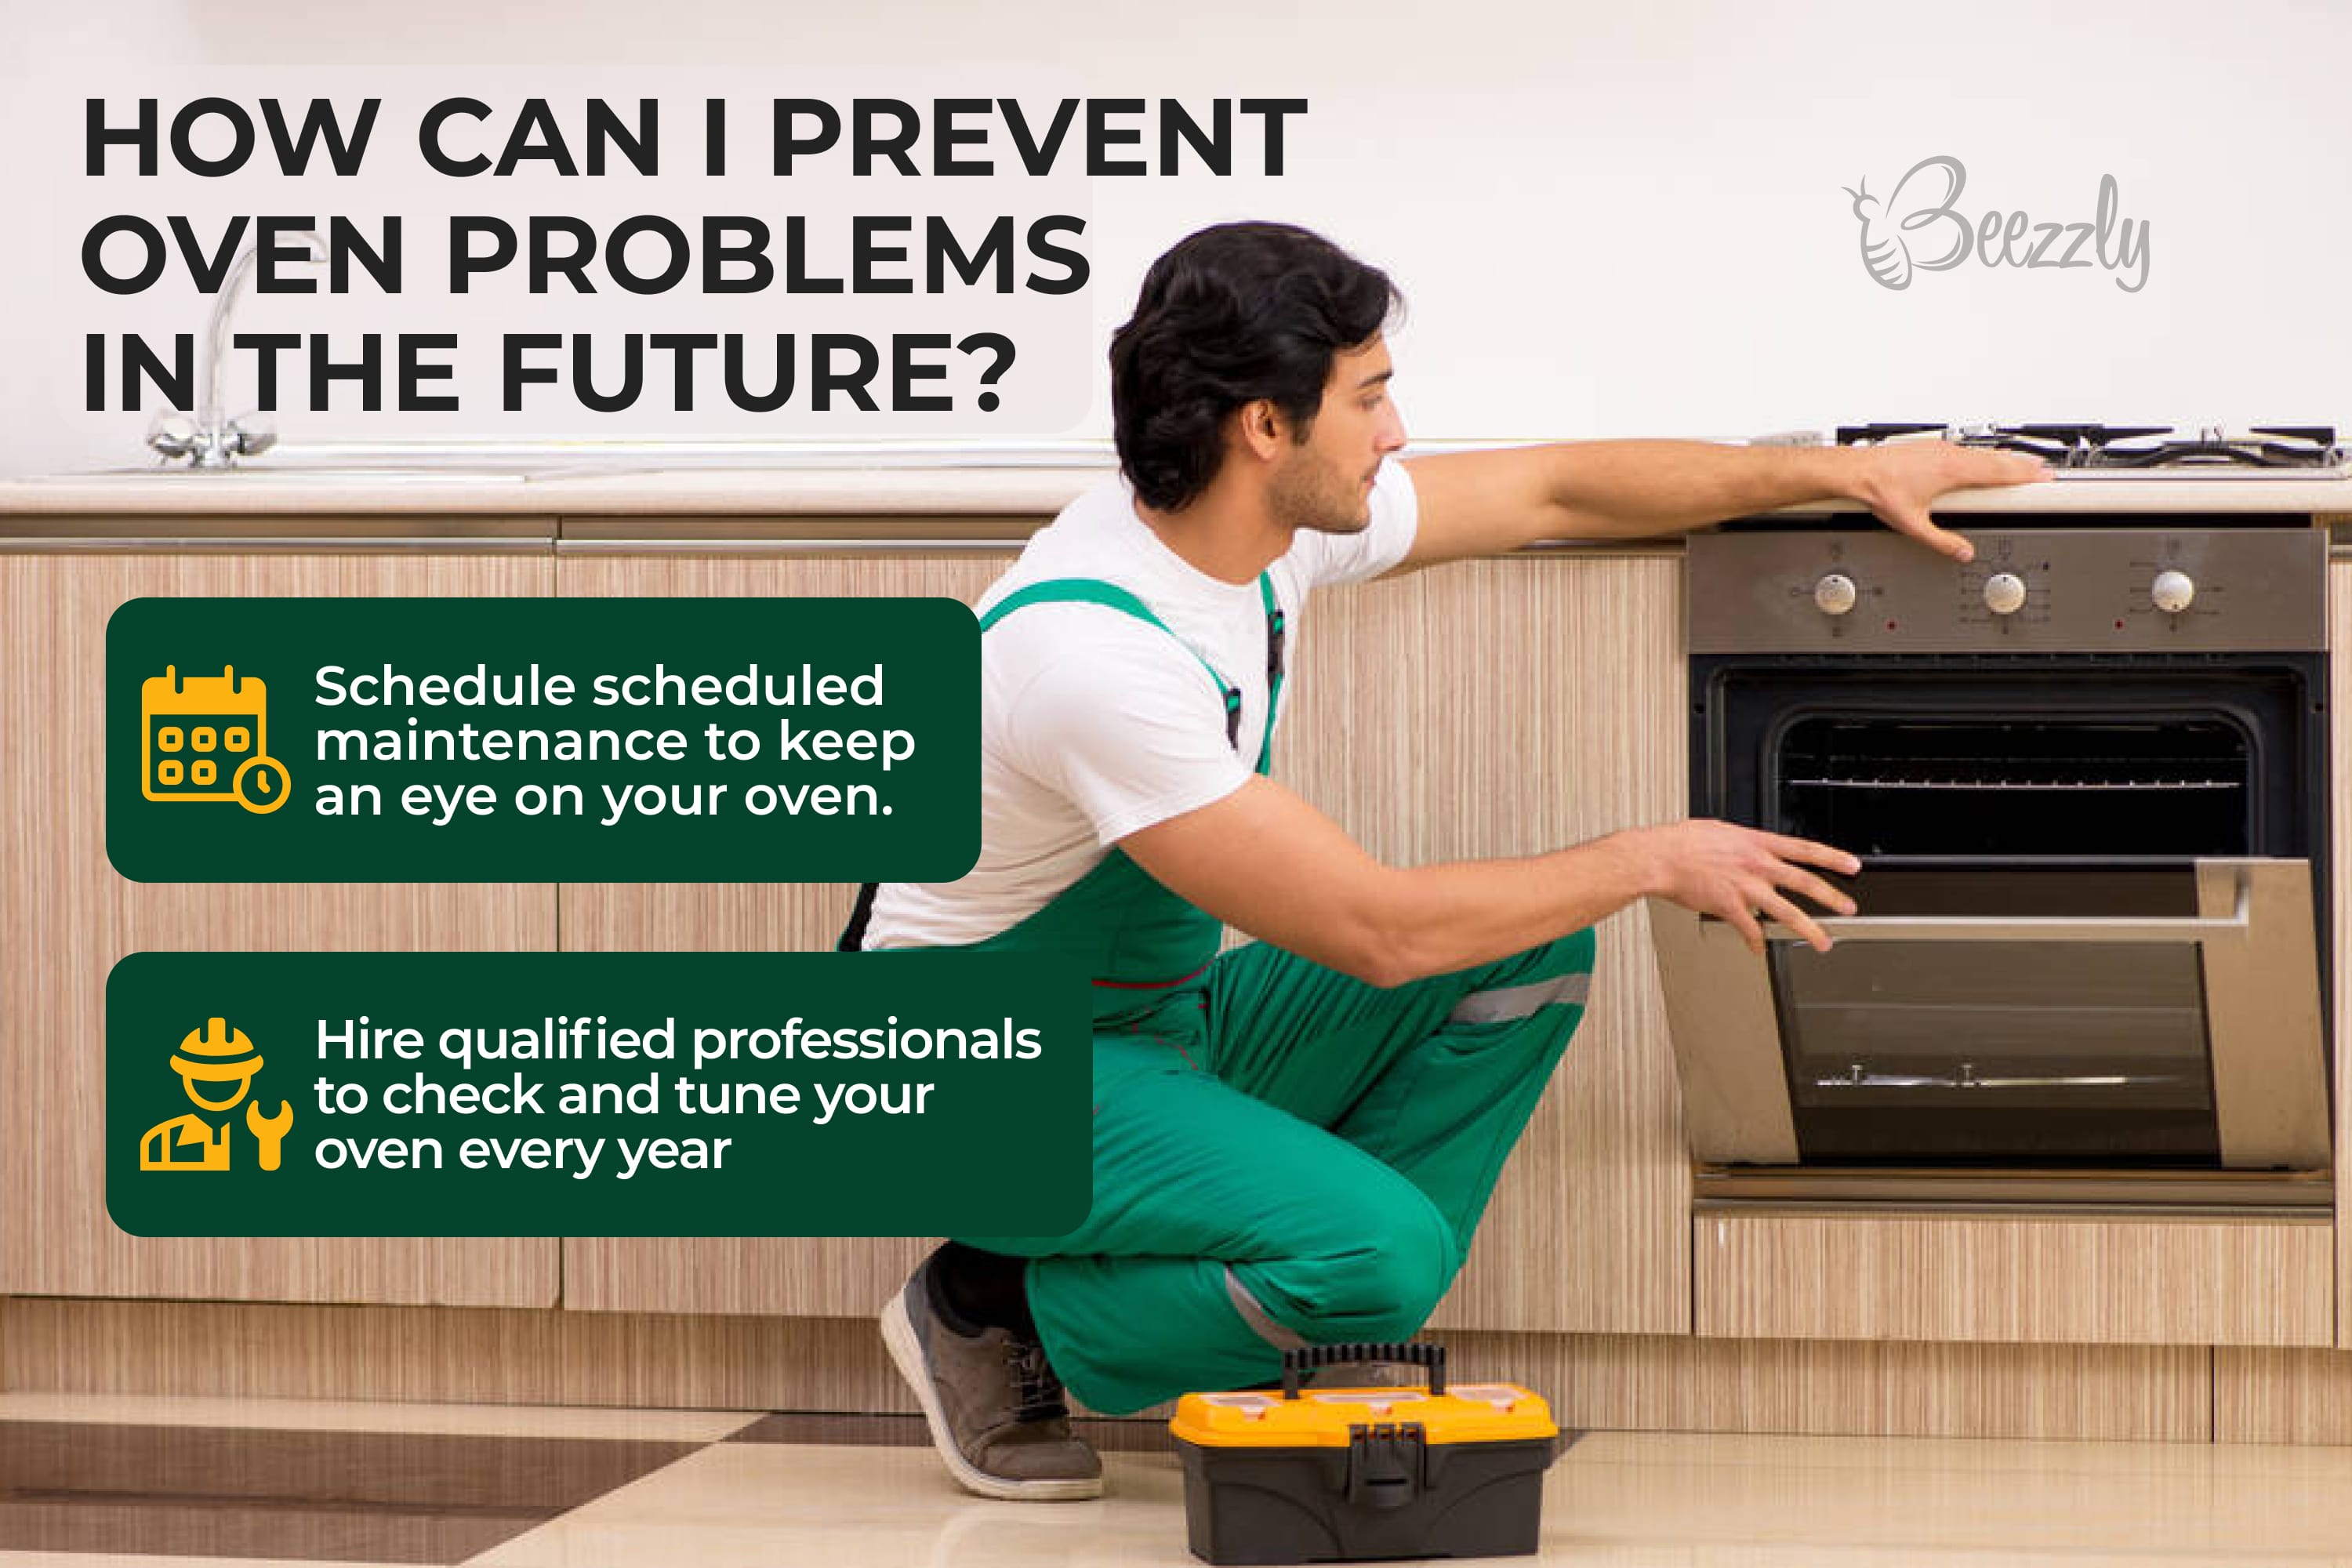 How can I prevent oven problems in the future